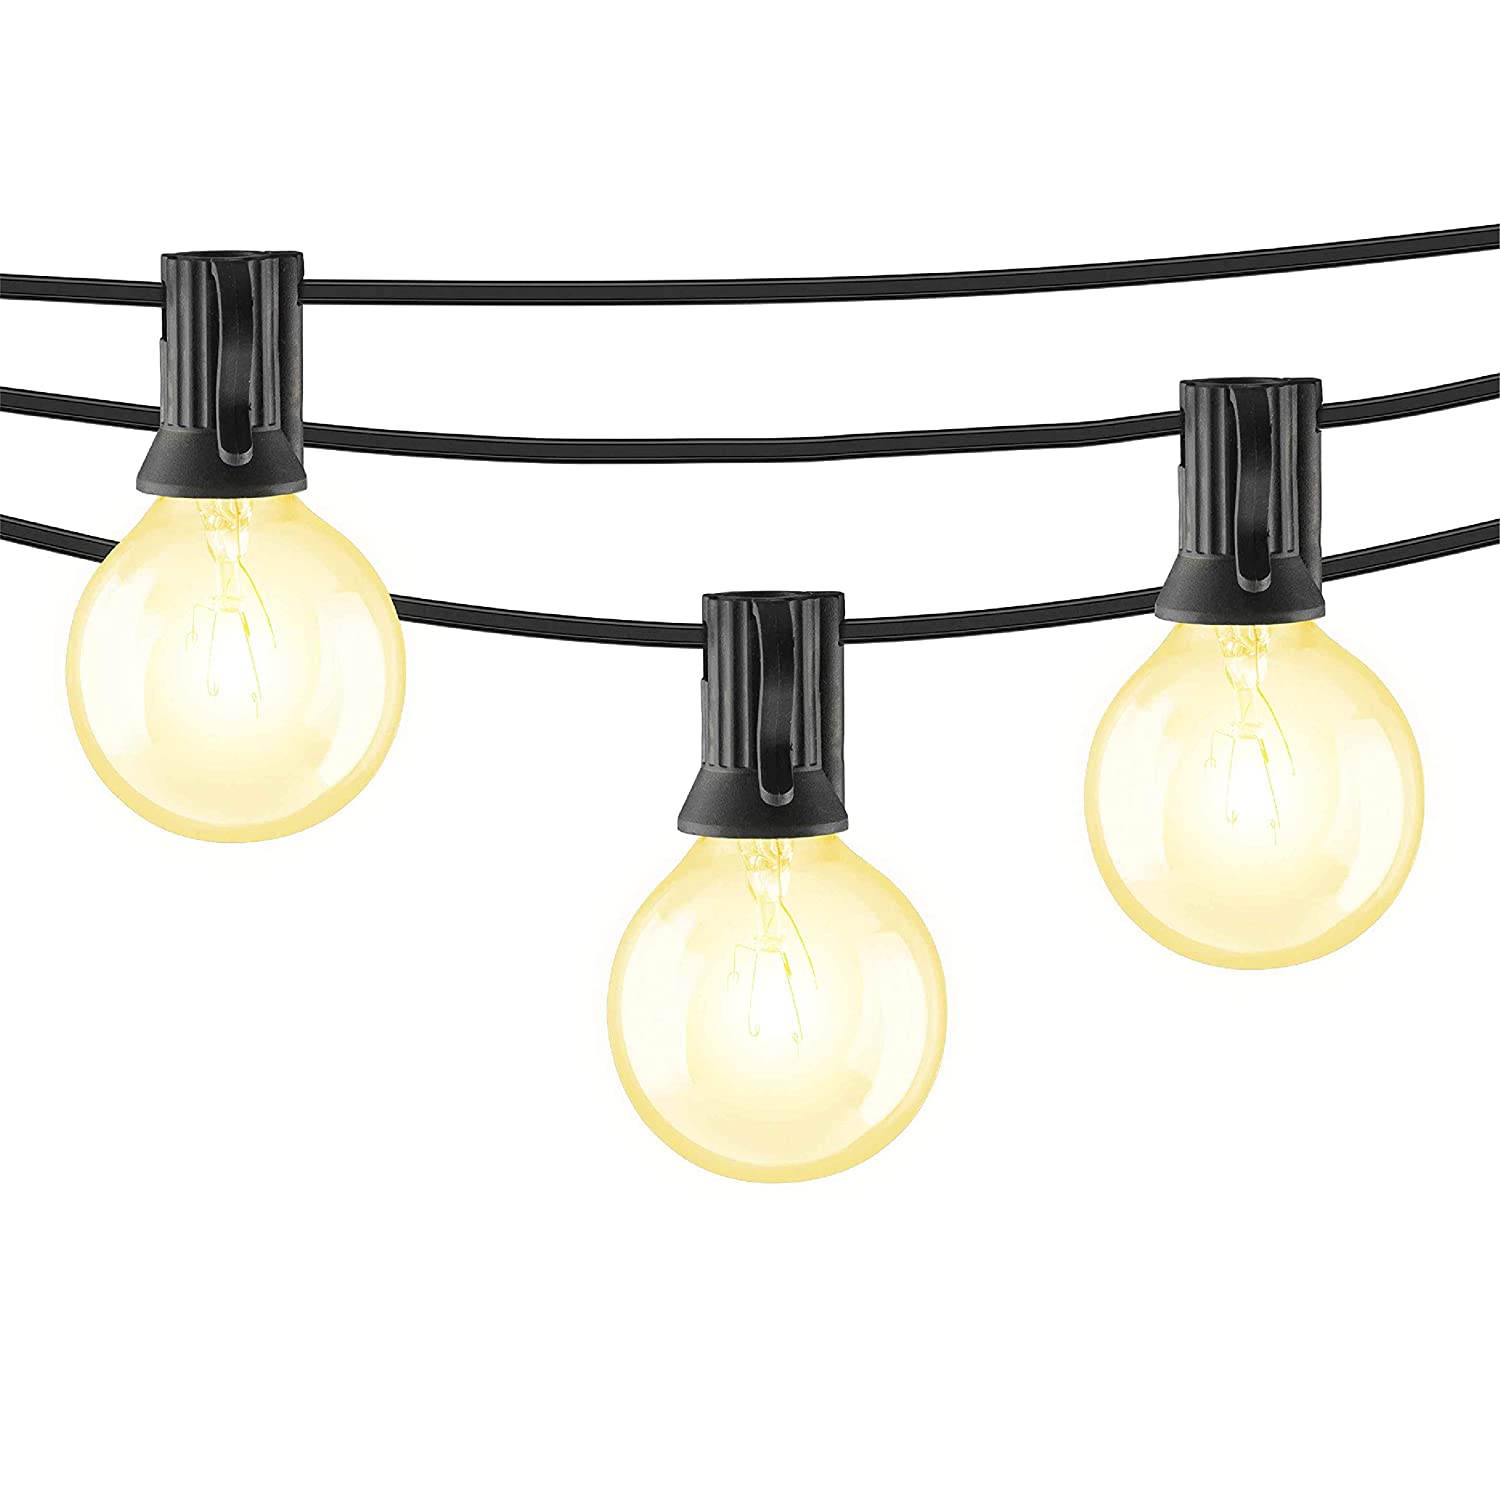 Mr Beams Dimmable Indoor String Lights, 100-Foot